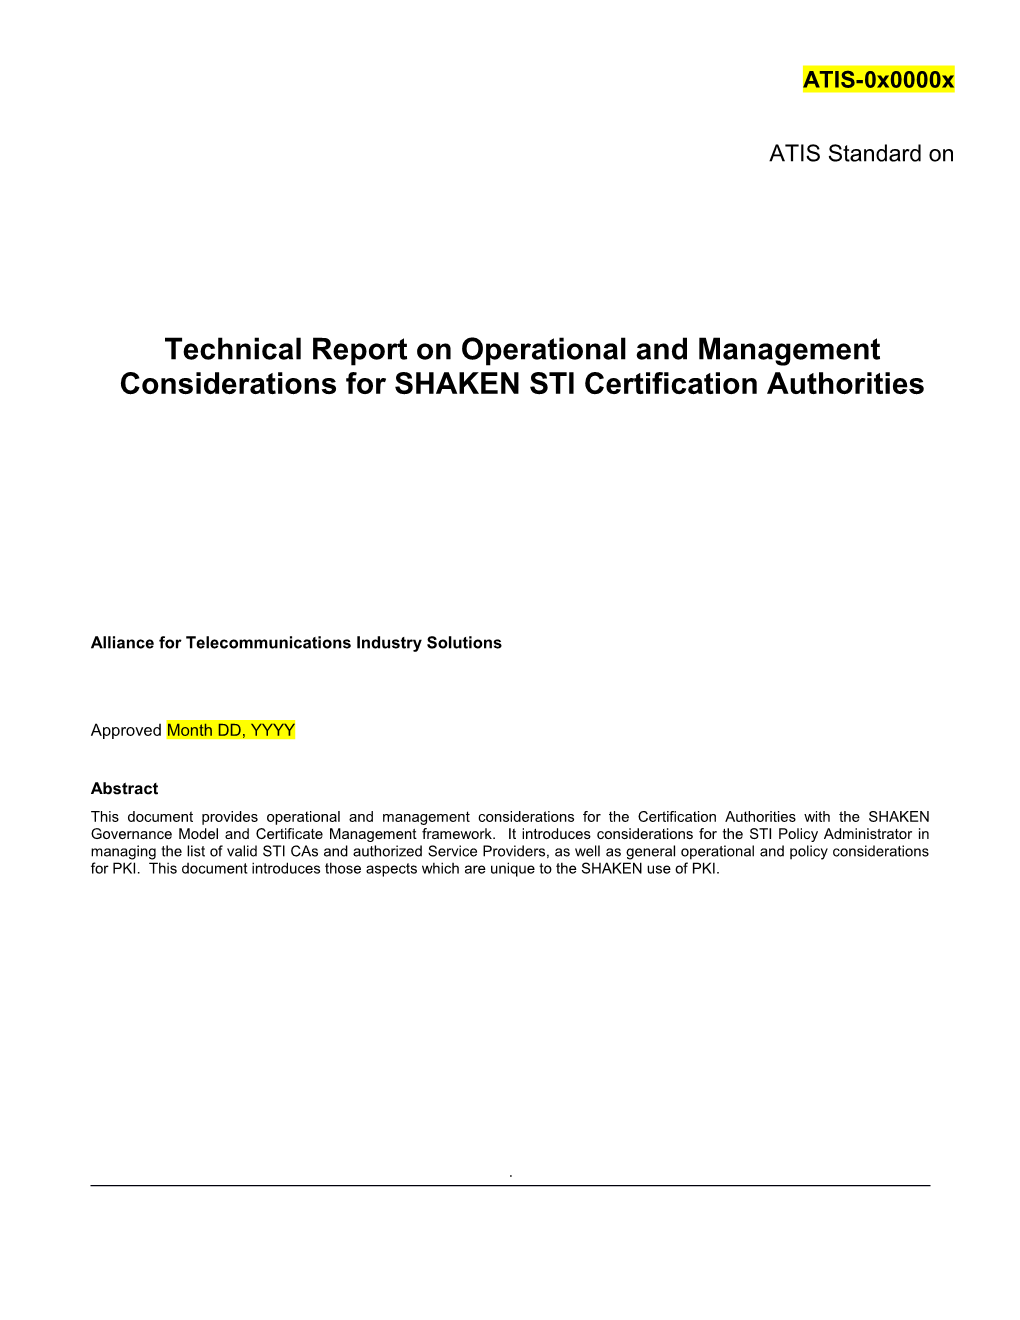 Technical Report on Operational and Management Considerations for SHAKEN STI Certification